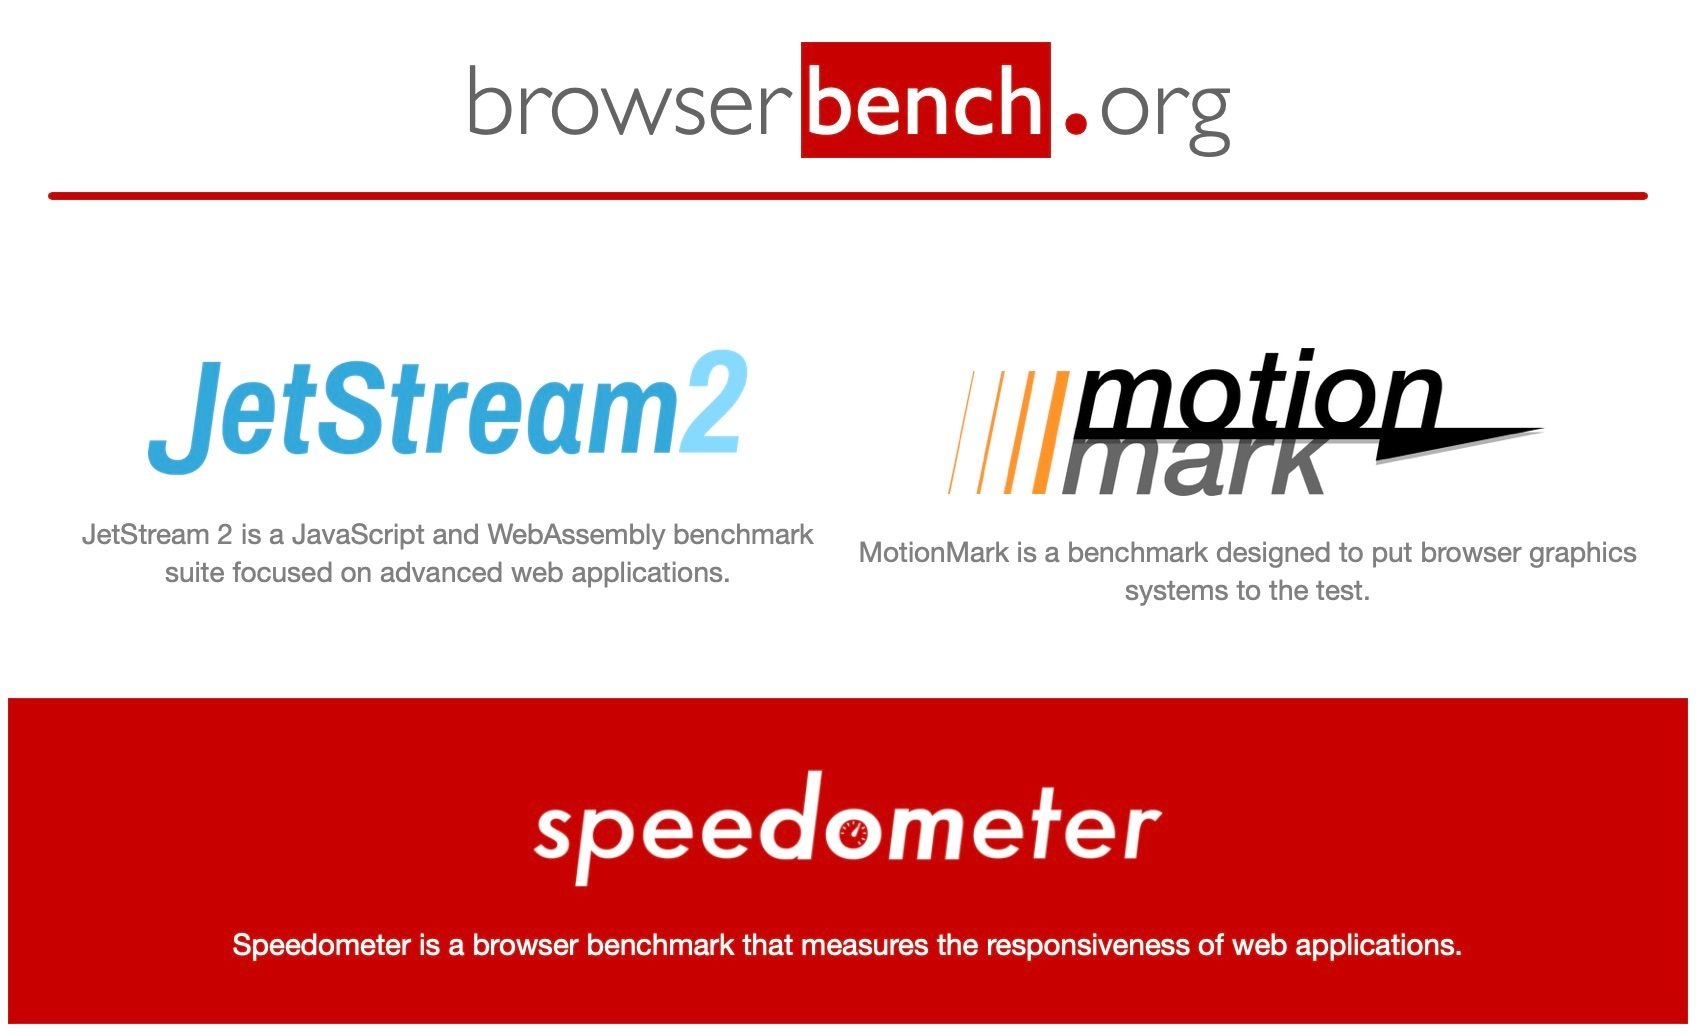 Browserbench.org Tests, with a highlight on the Speedometer test